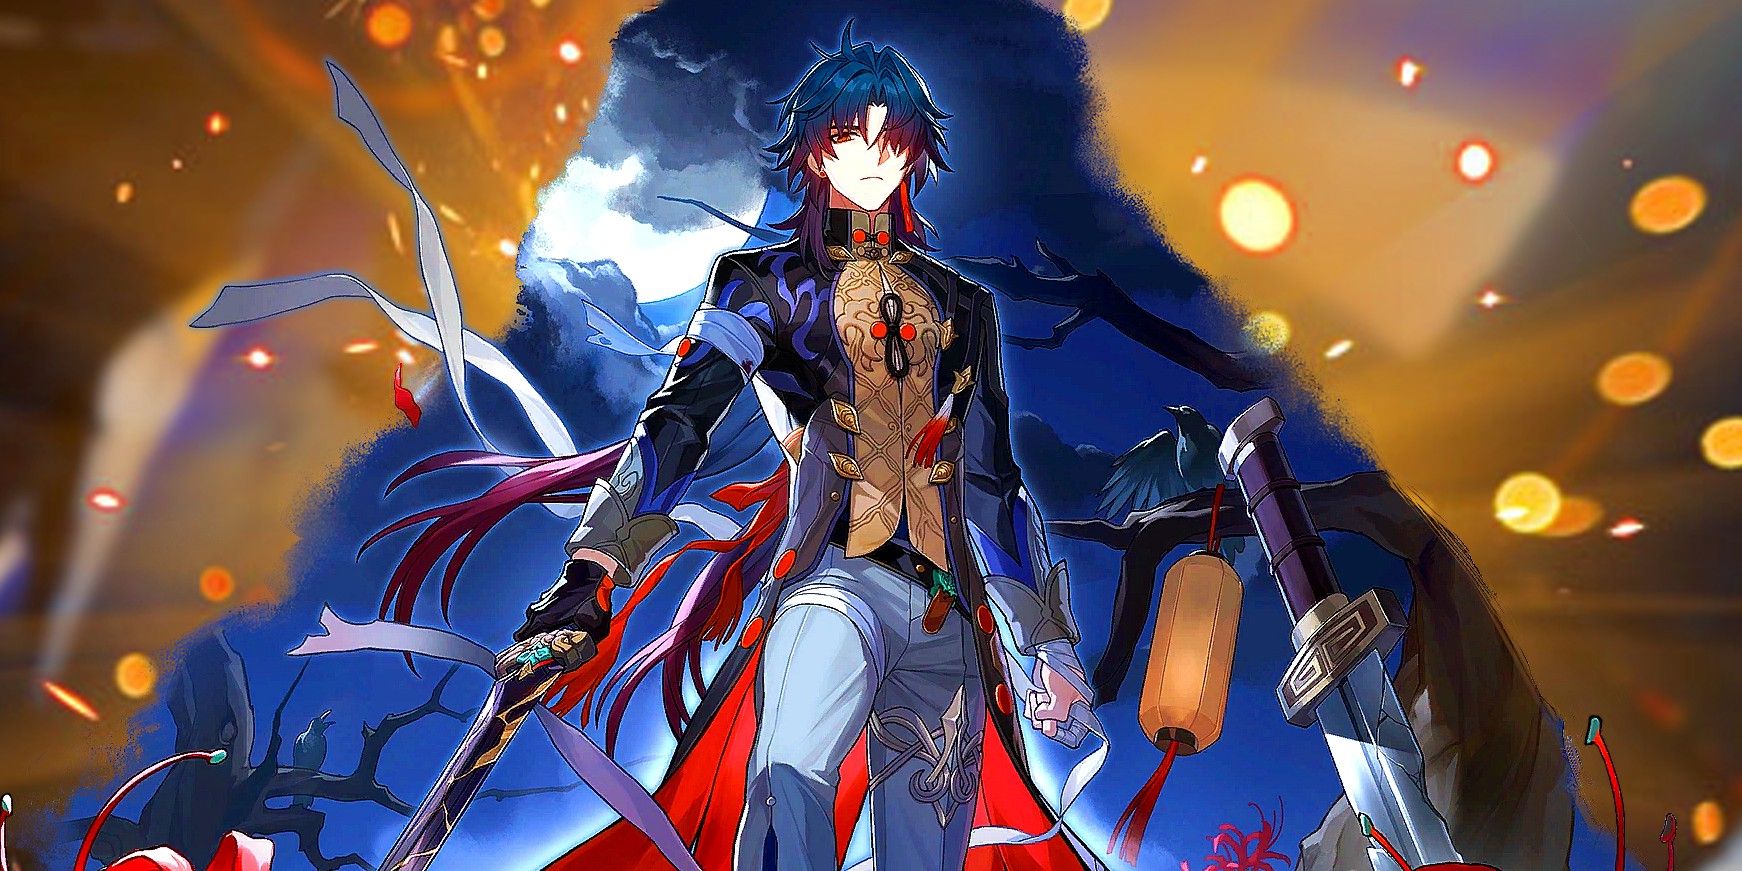 Honkai Star Rail's Blade poses with his sword in hand in the middle. There is a dark sky behind him, along with a crow that observes him from a tree. Behind his key art is an orange explosion effect.